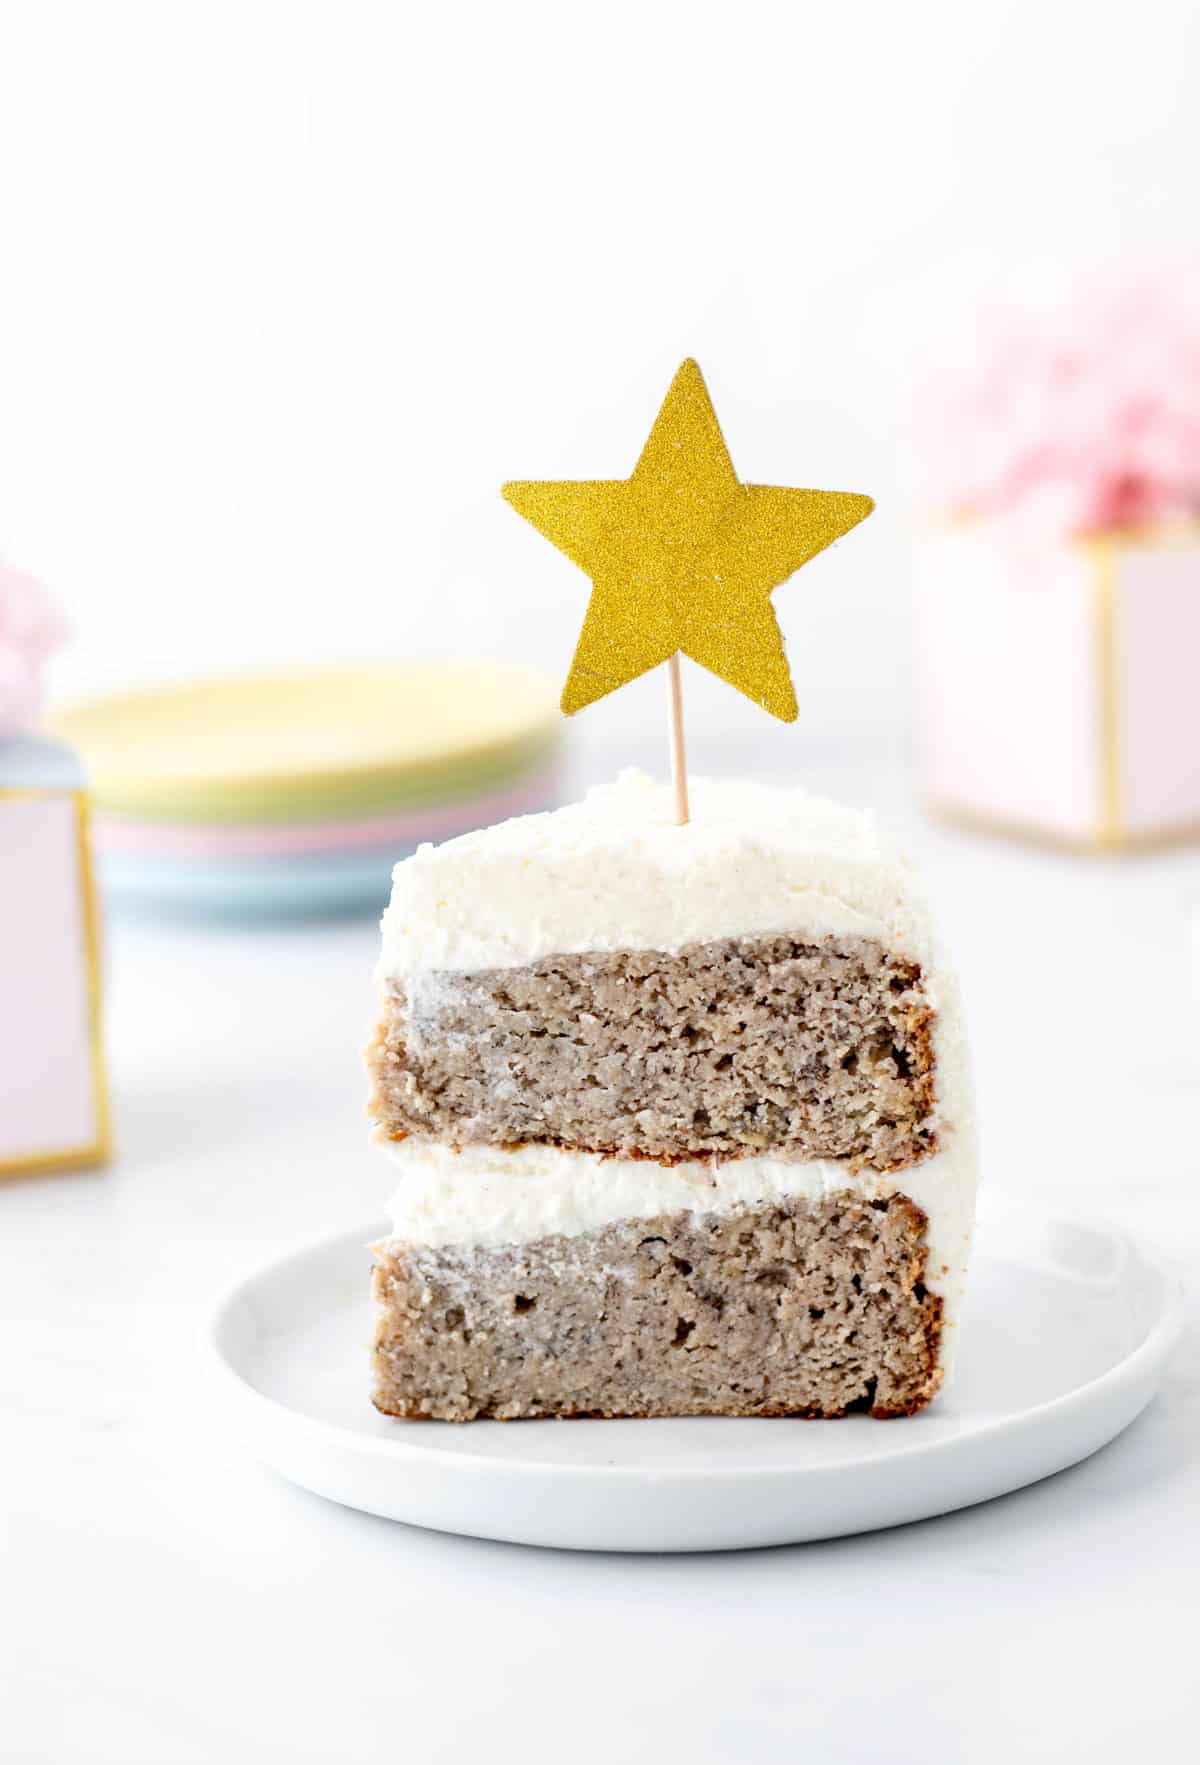 A slice of healthy smash cake on a plate with a star topper.